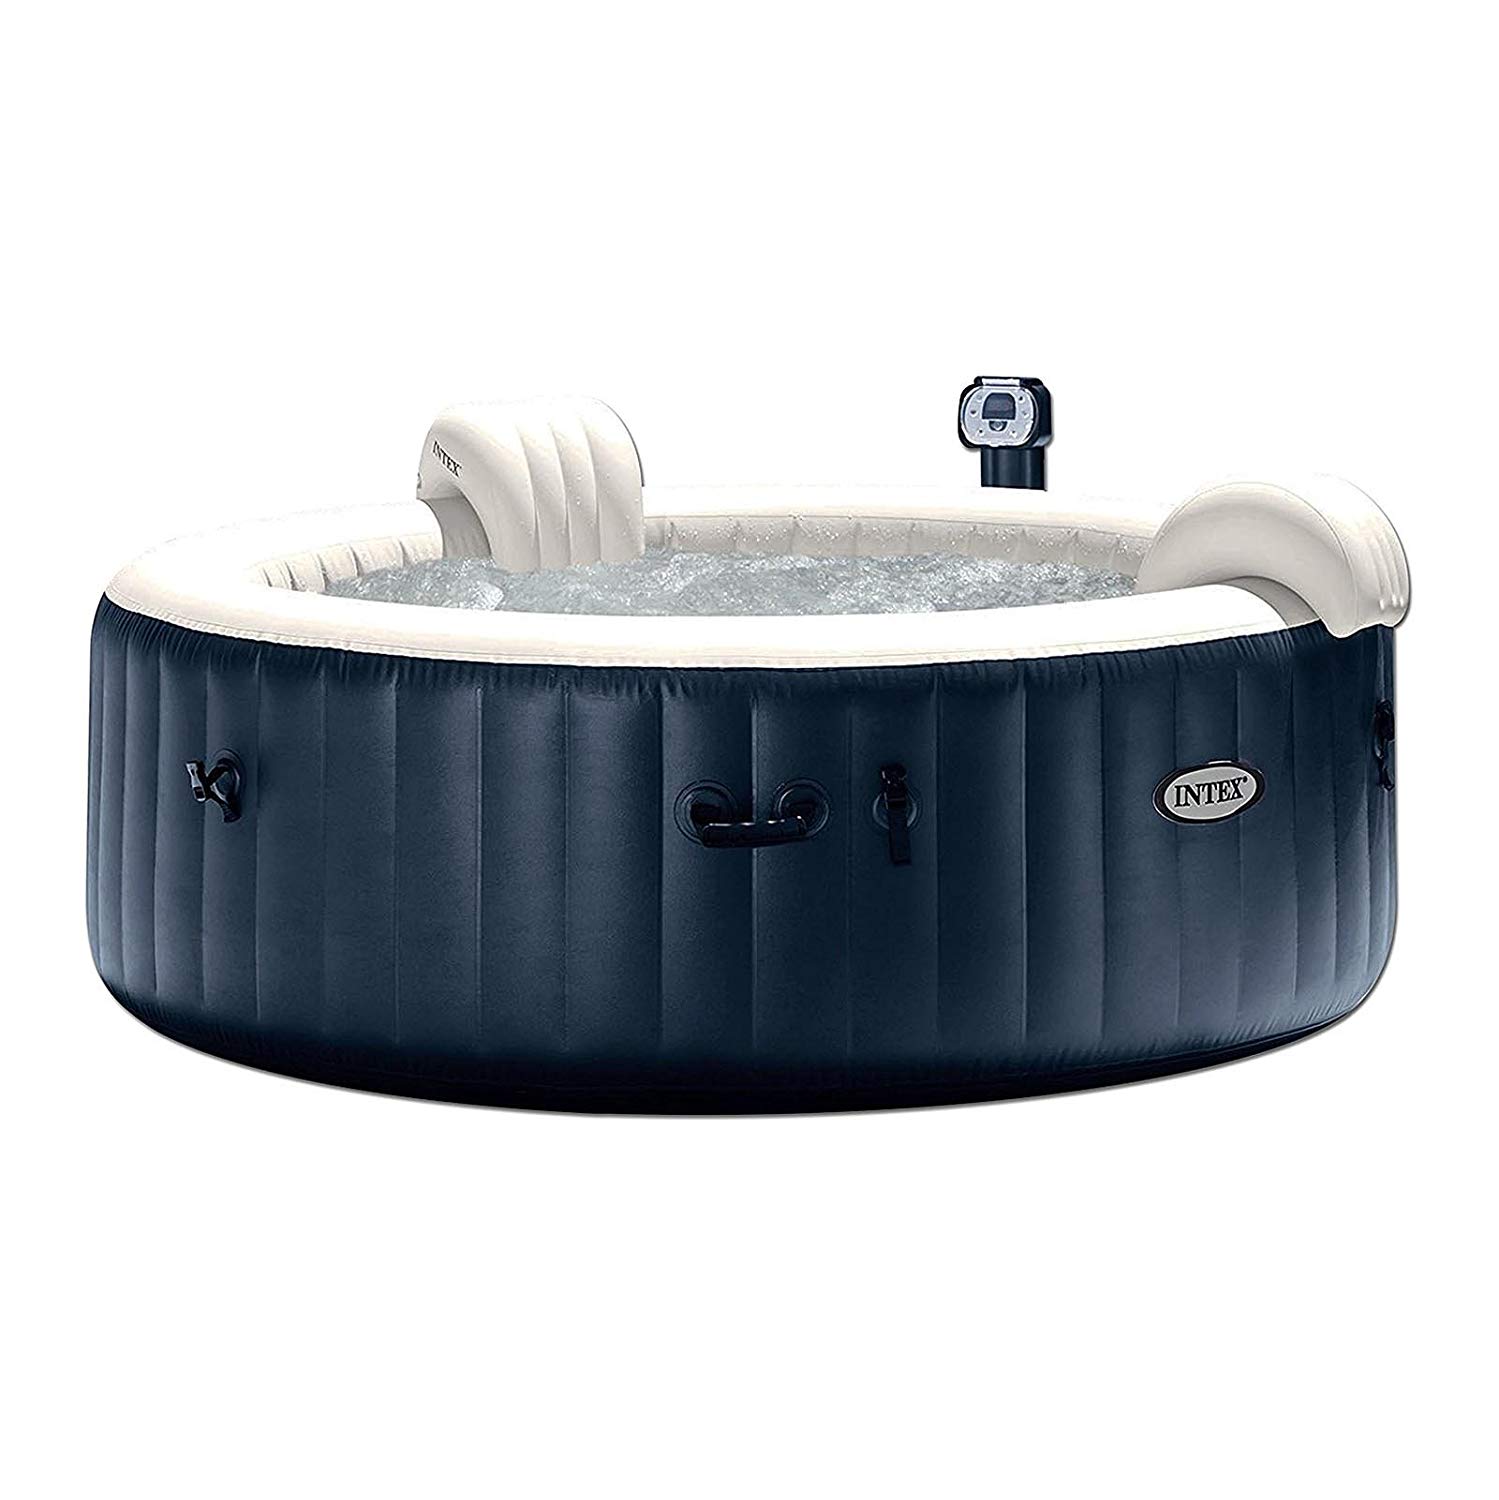 Is it worth buying a hot tub?